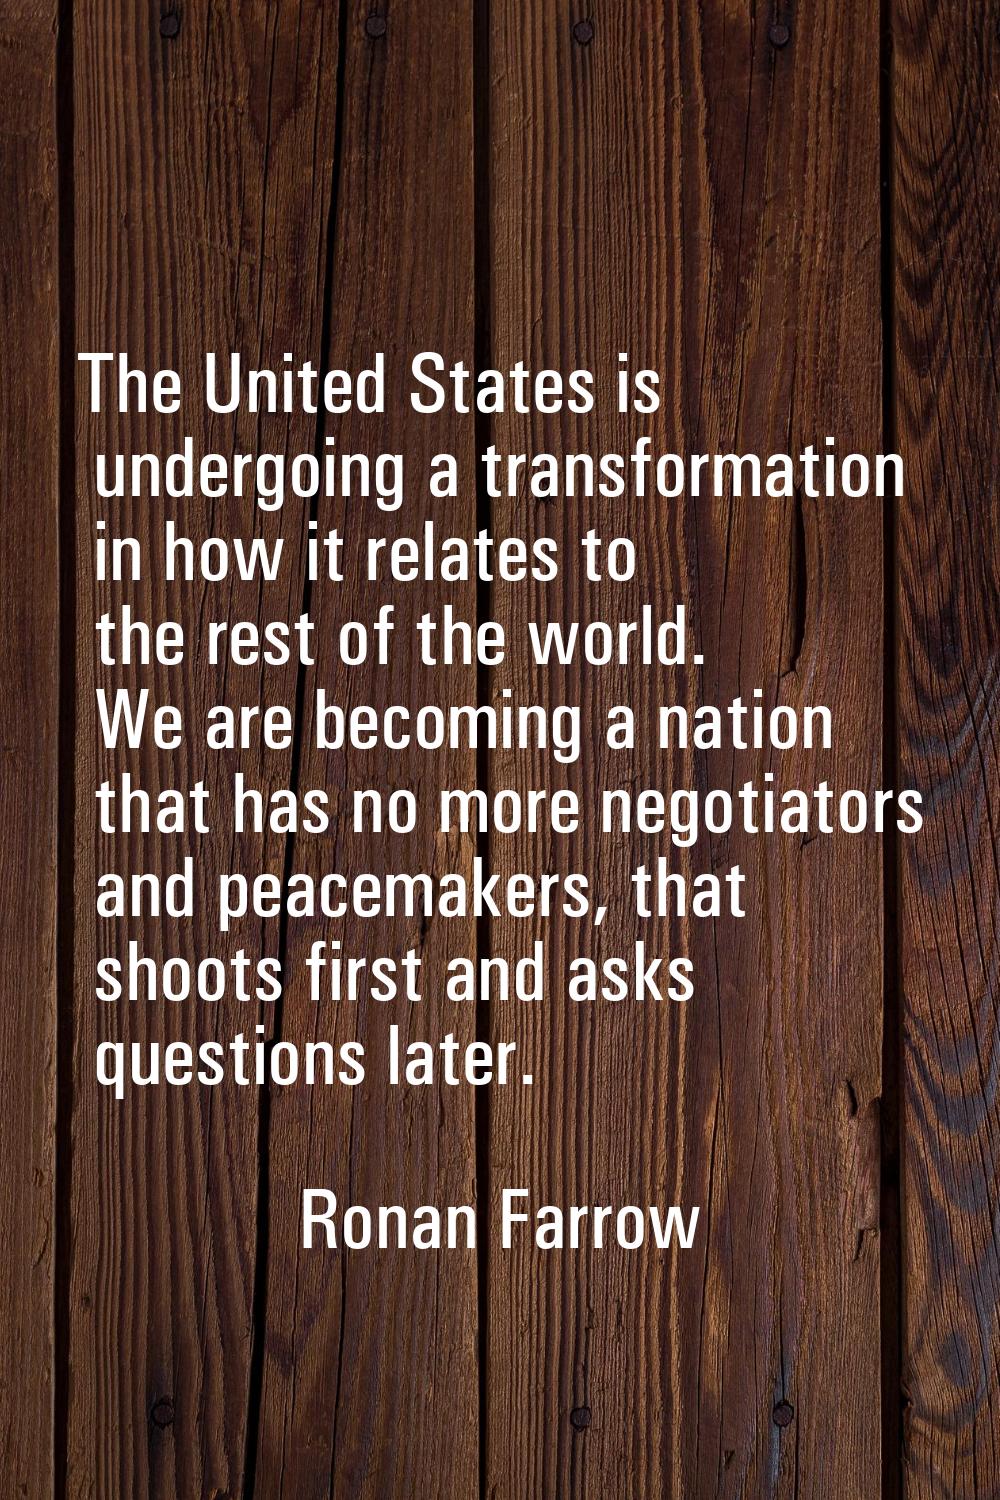 The United States is undergoing a transformation in how it relates to the rest of the world. We are